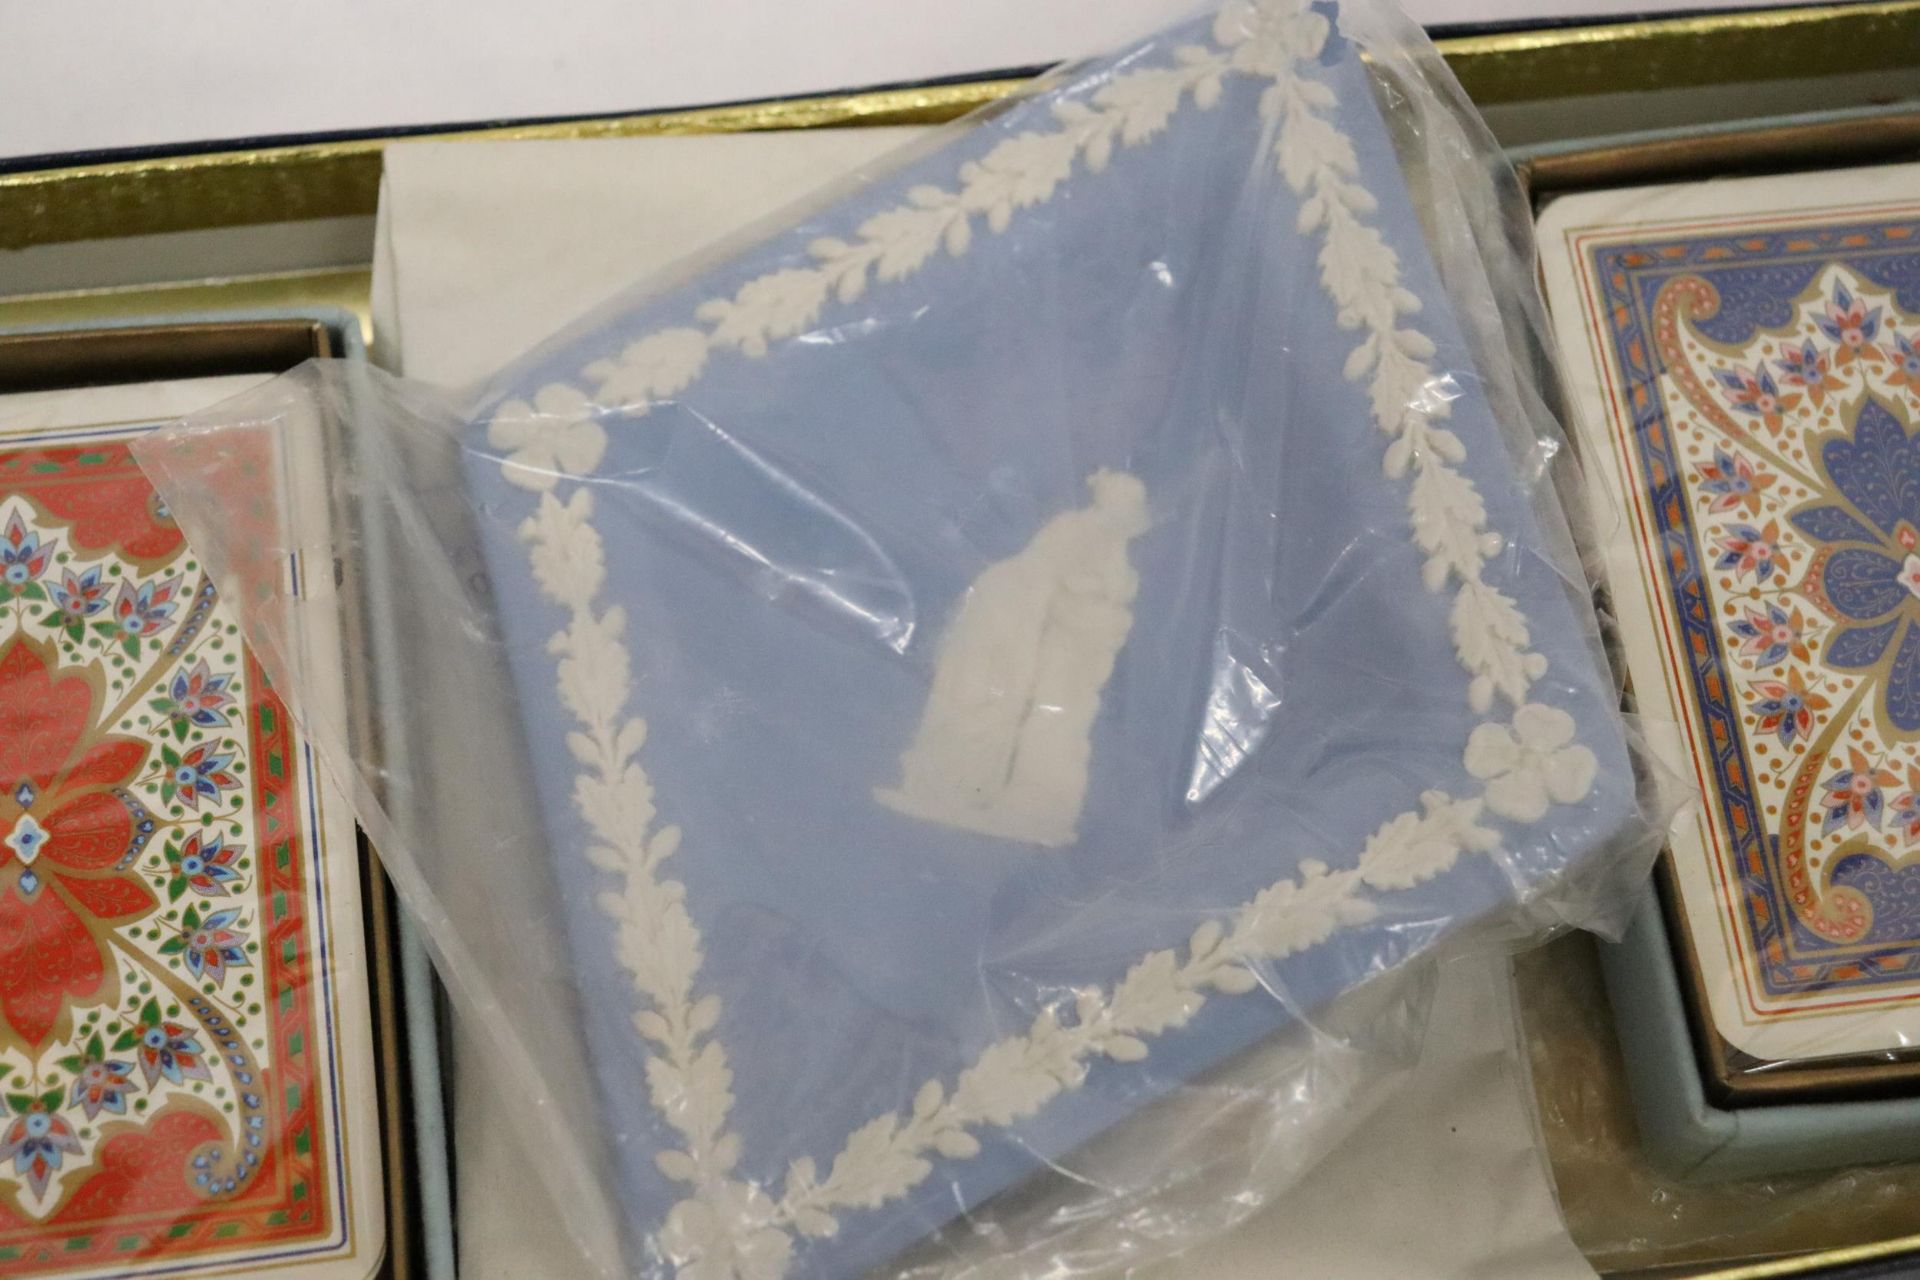 A WADDINGTONS WEDGWOOD JASPER CARD TRAY WITH PLAYING CARDS - Image 4 of 5